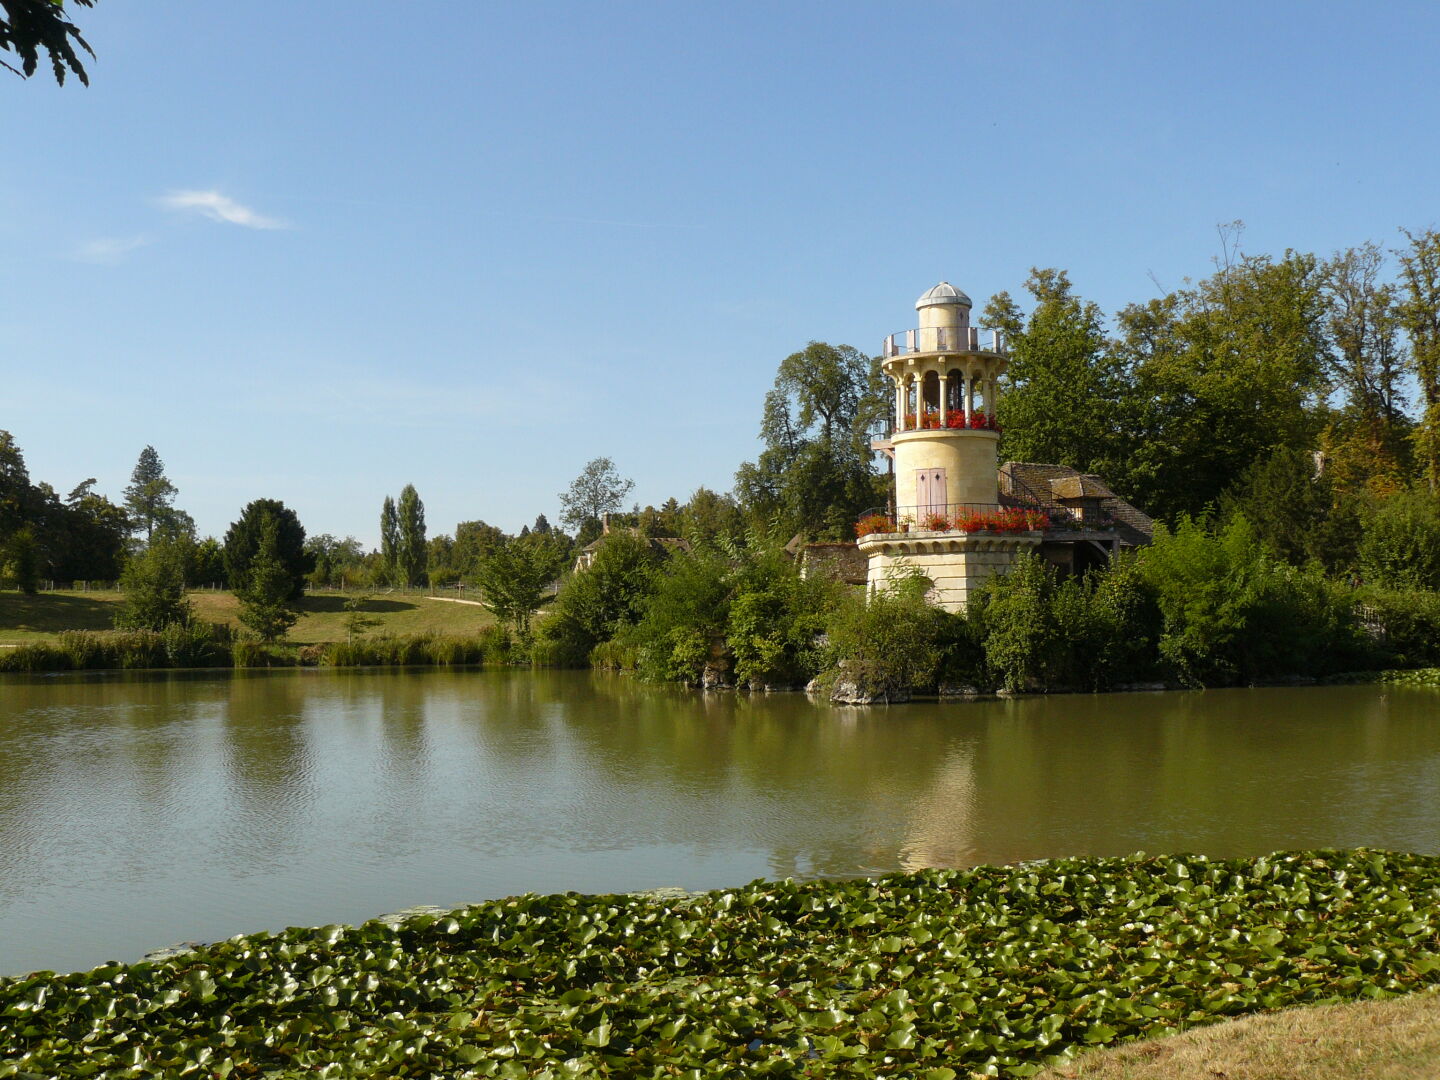 Marie Antoinette had her own little farmer&rsquo;s village built in the castle gardens. This is the fishing lage with Marlborough tower.